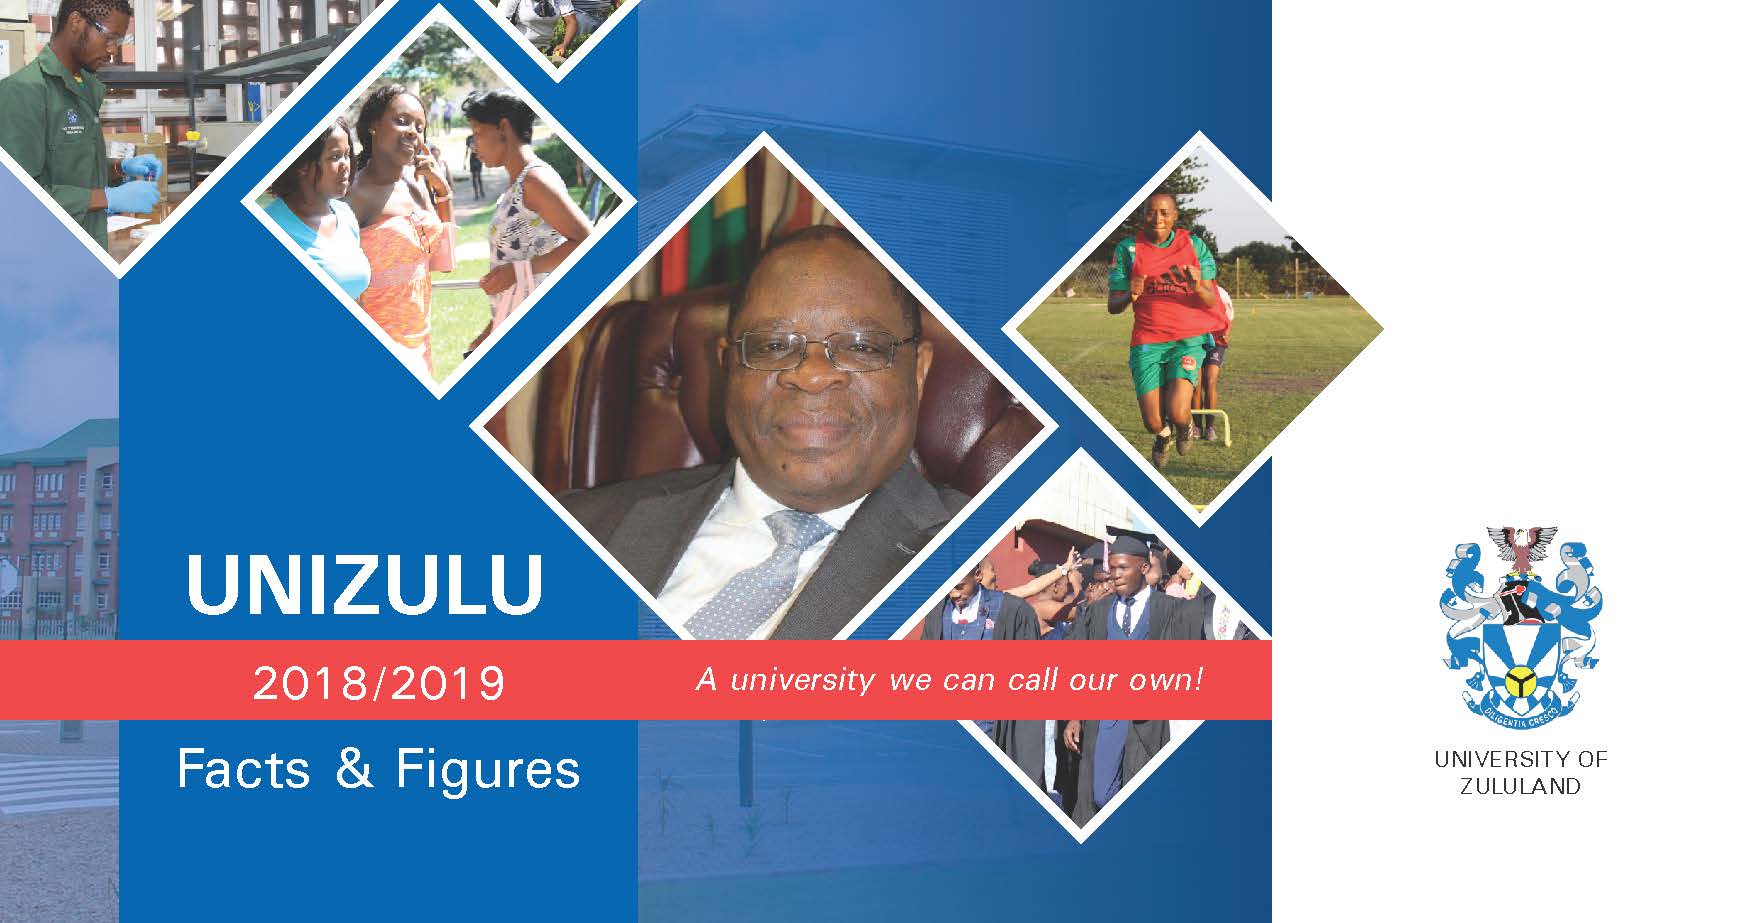 UNIZULU Facts and Figures (00000002)_Page_01